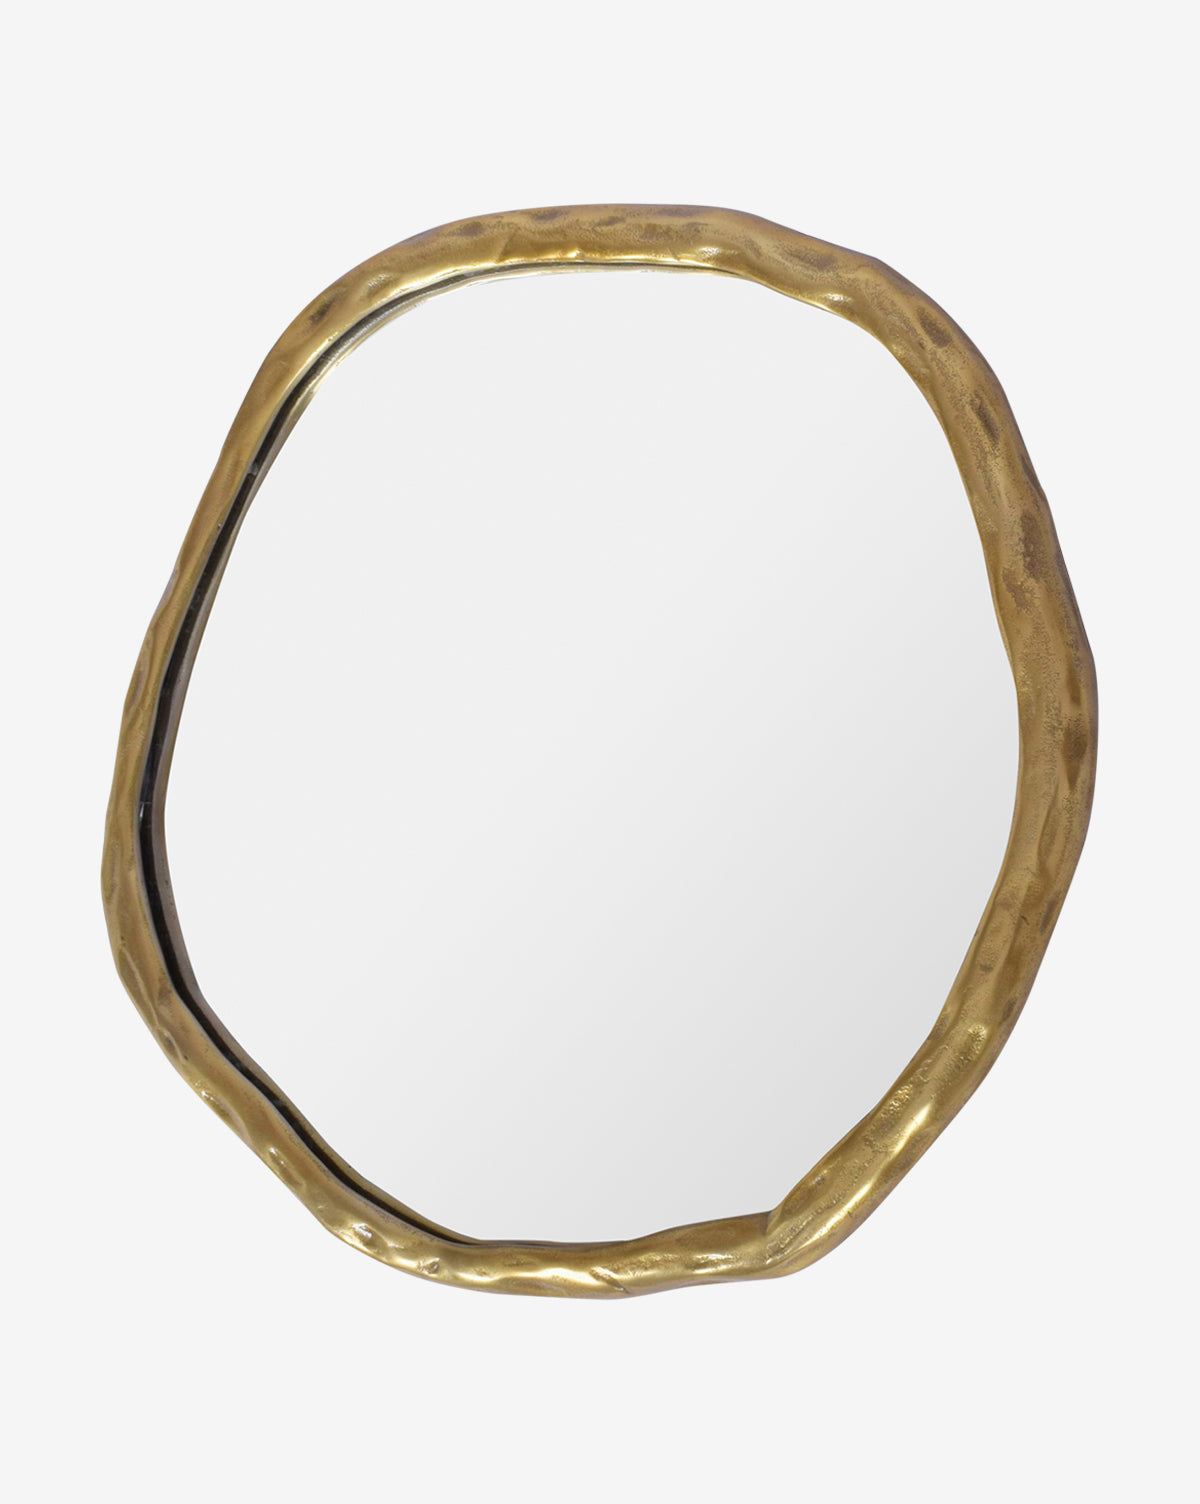 Moe's Home Collection, Keira Round Mirror